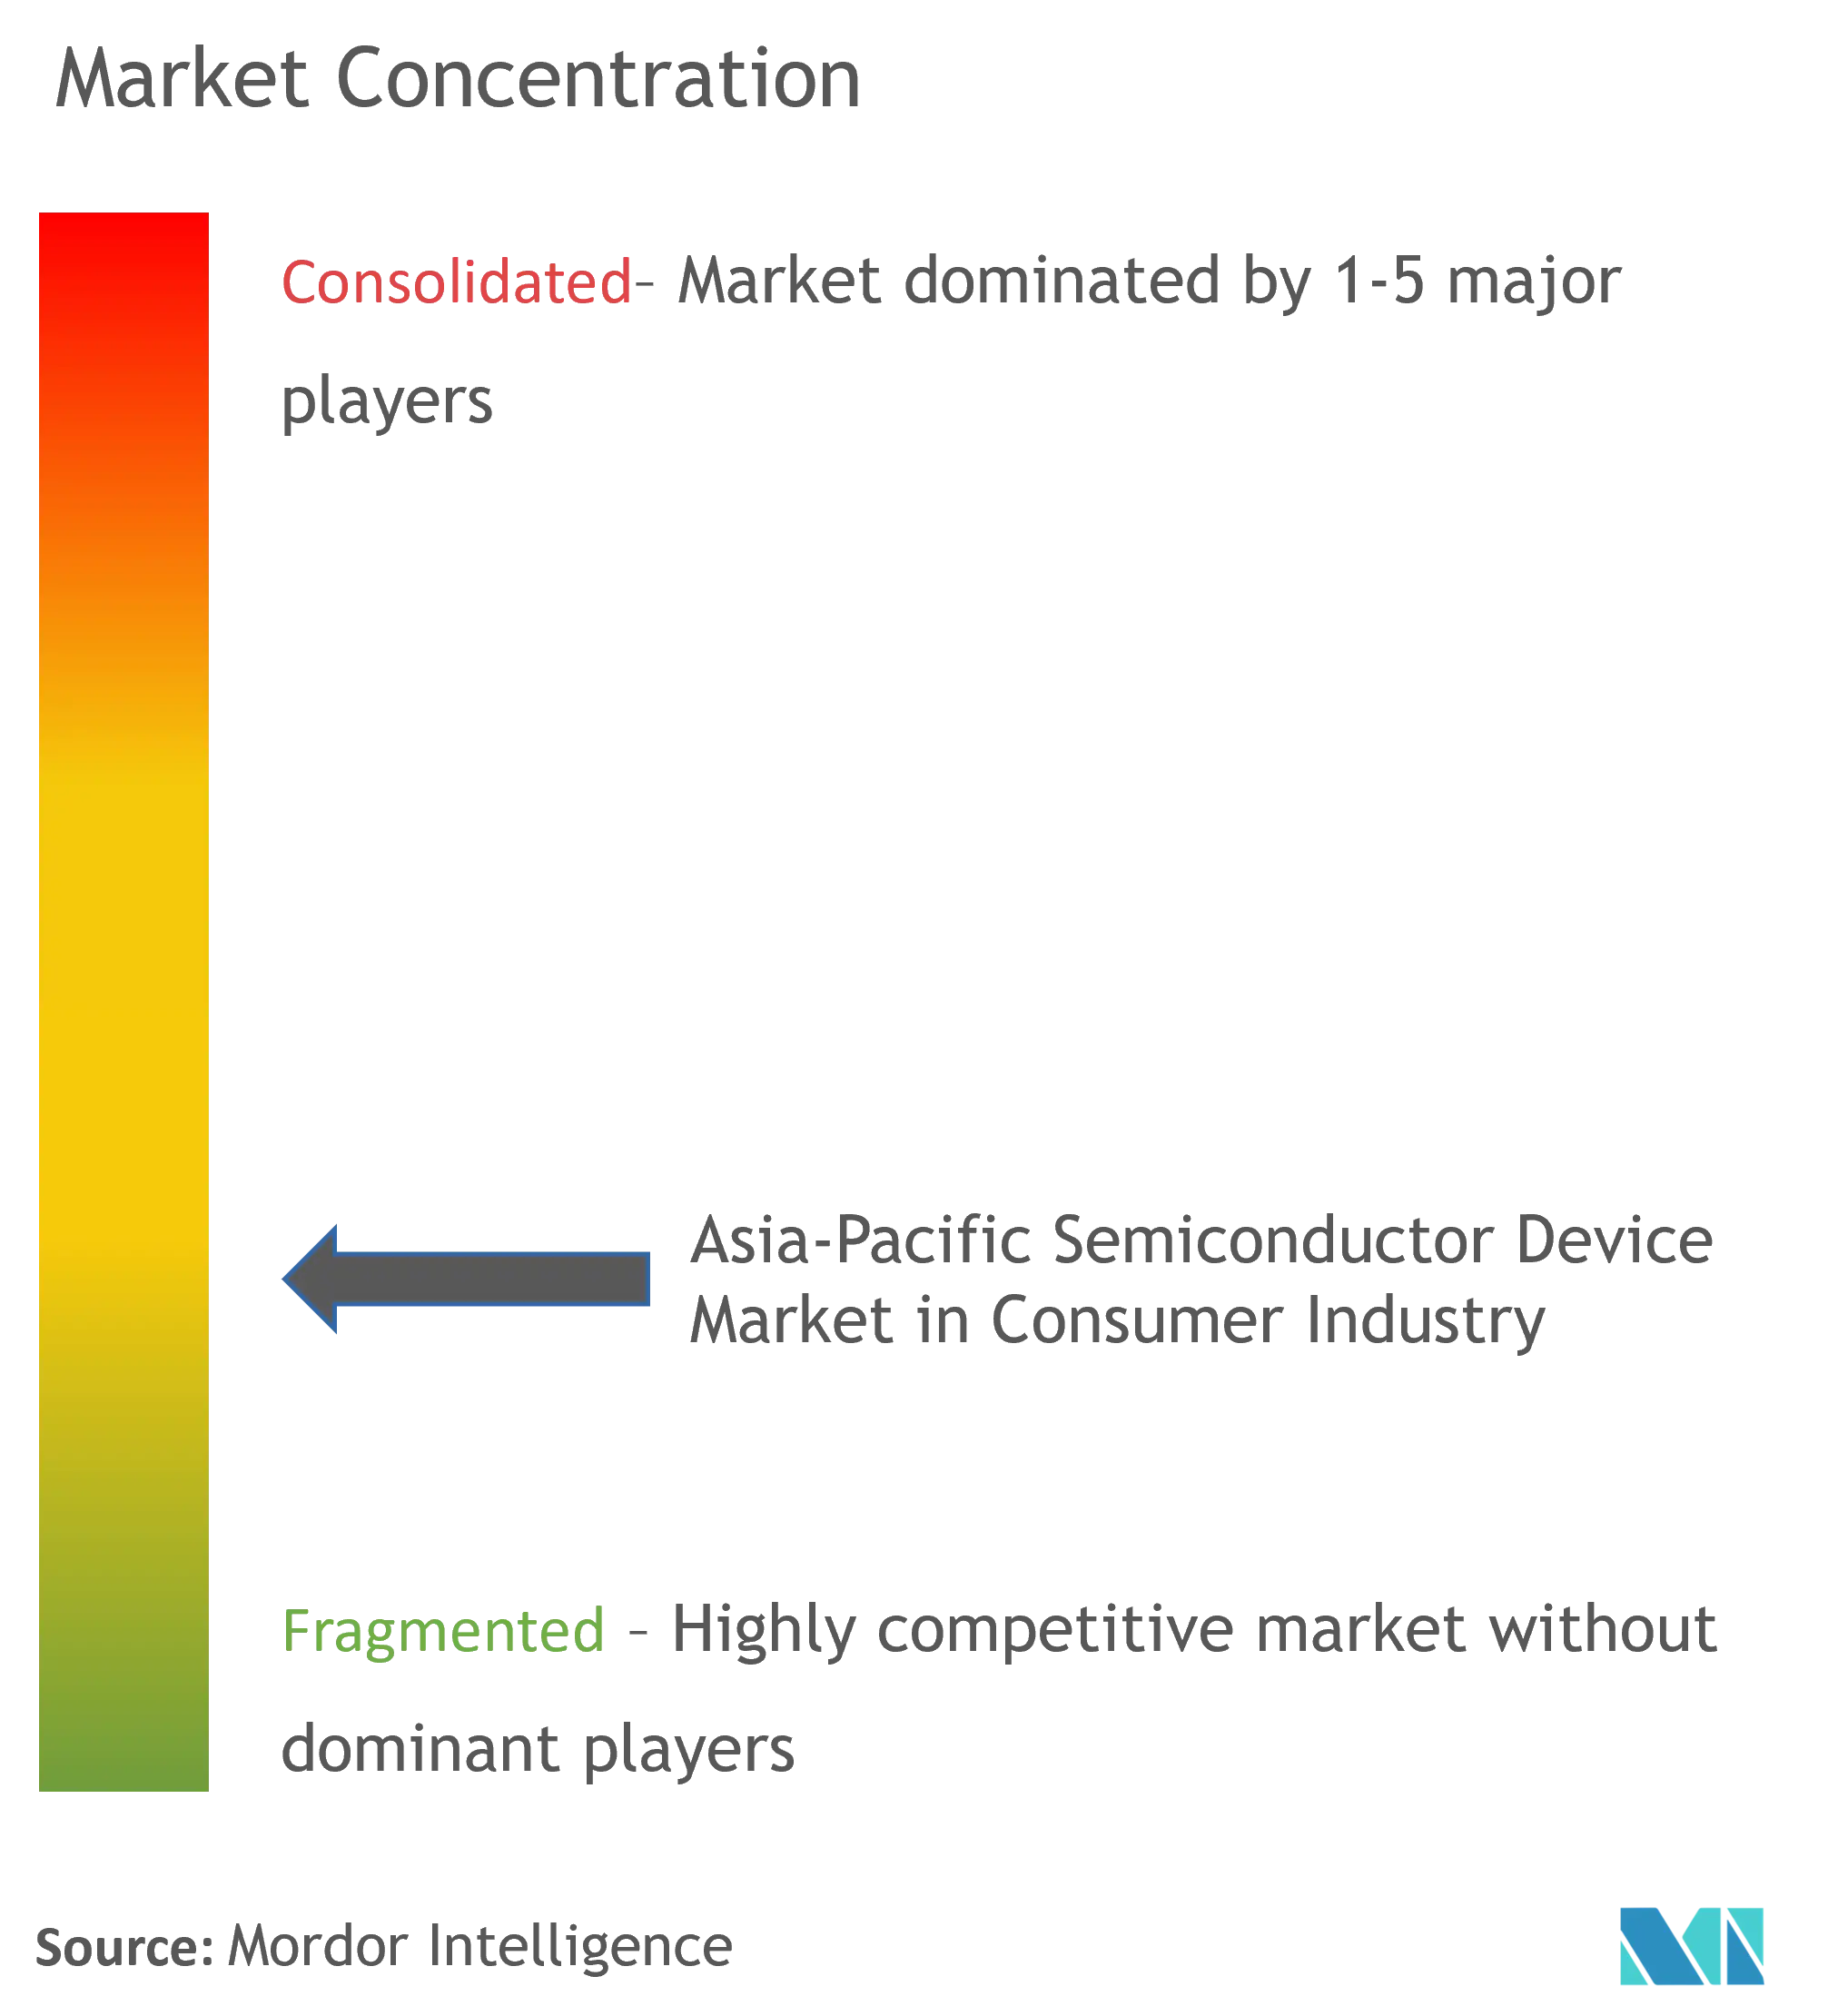 APAC Semiconductor Device Market Concentration